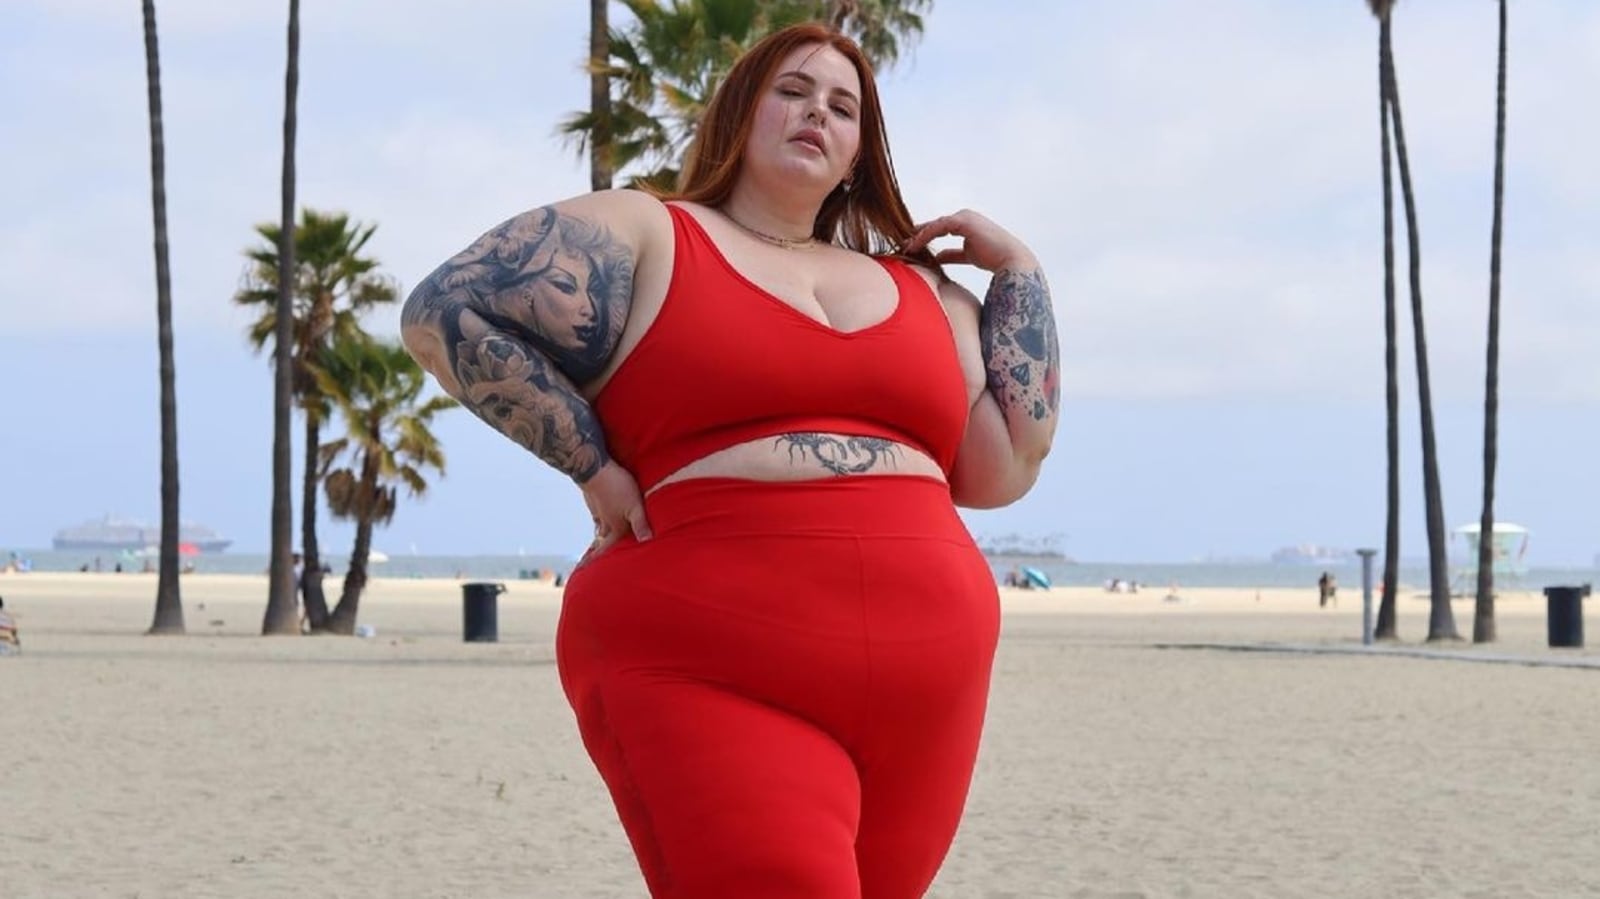 I Am Anorexic Plus Size Model Tess Holiday Shares Recovery From Eating